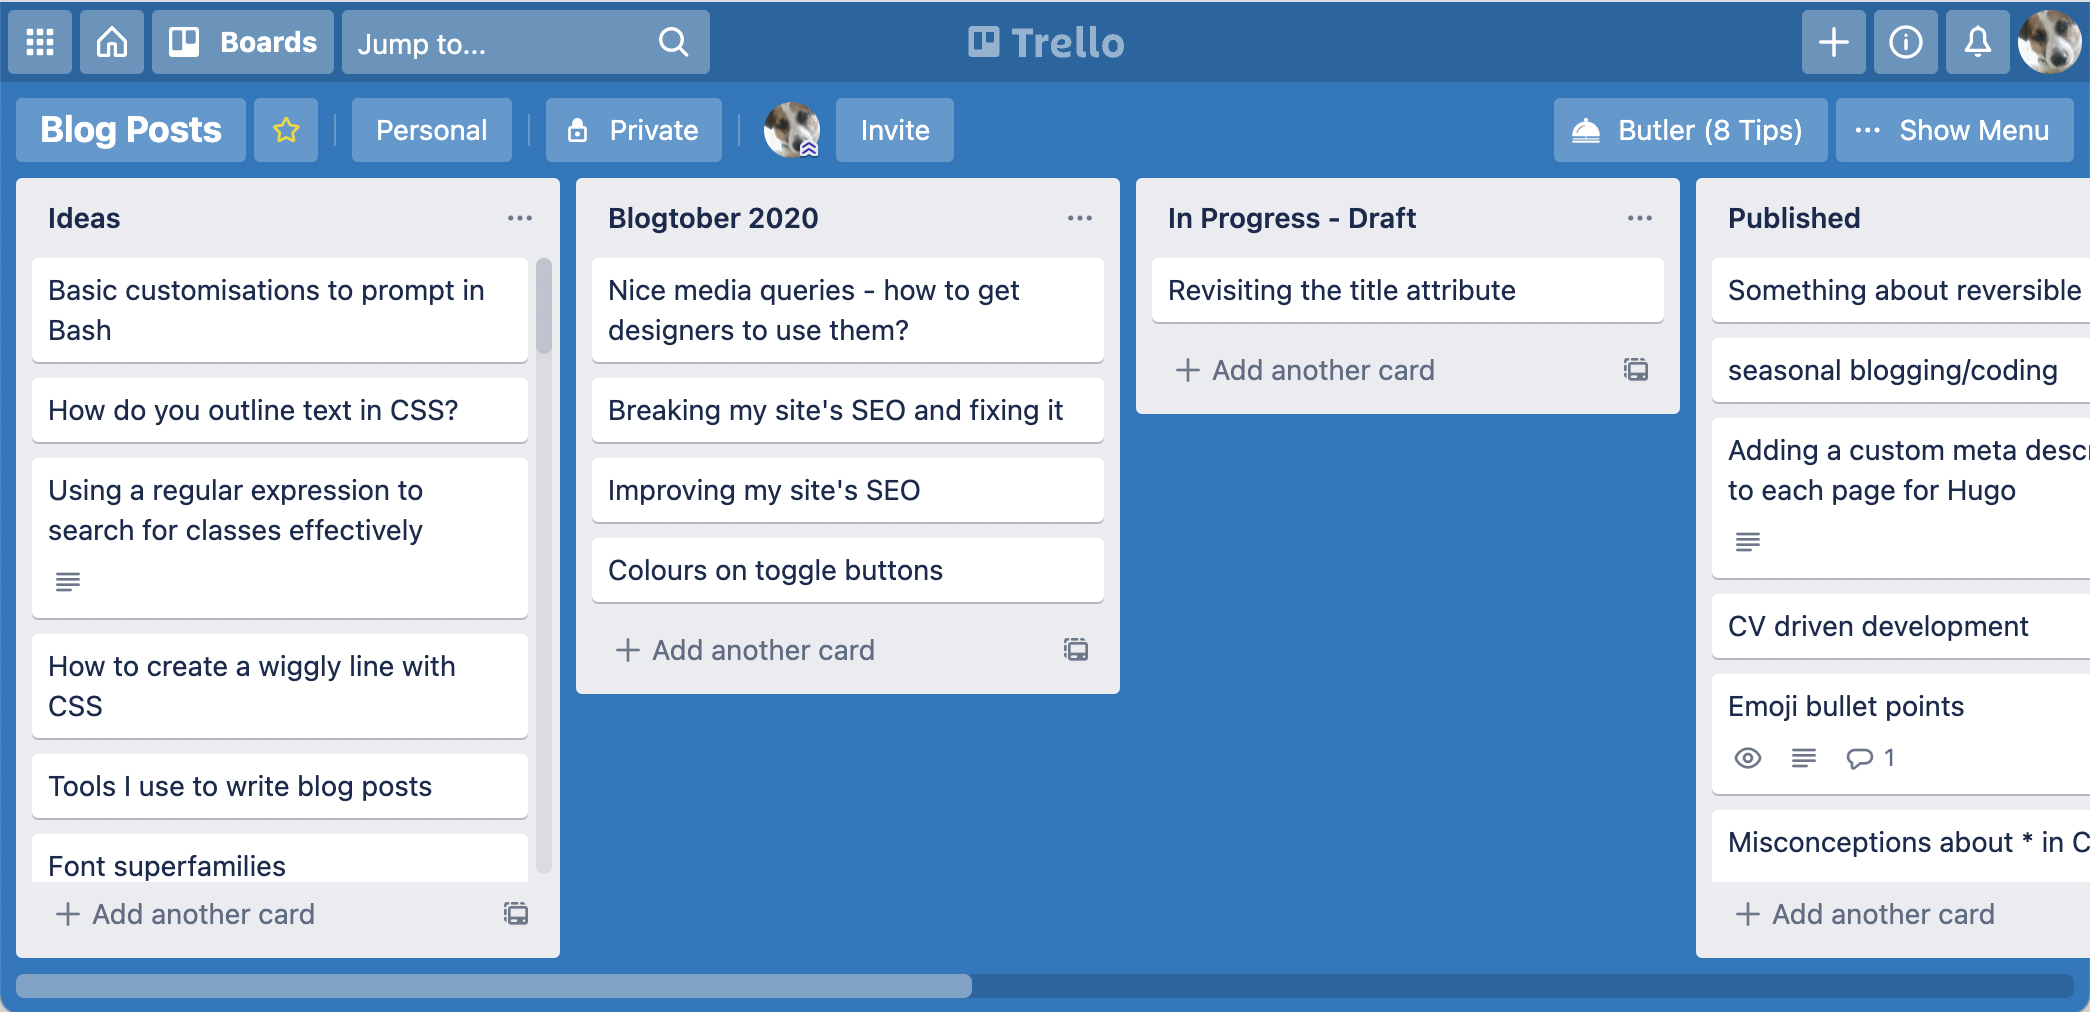 Trello board, columns and lists with no count